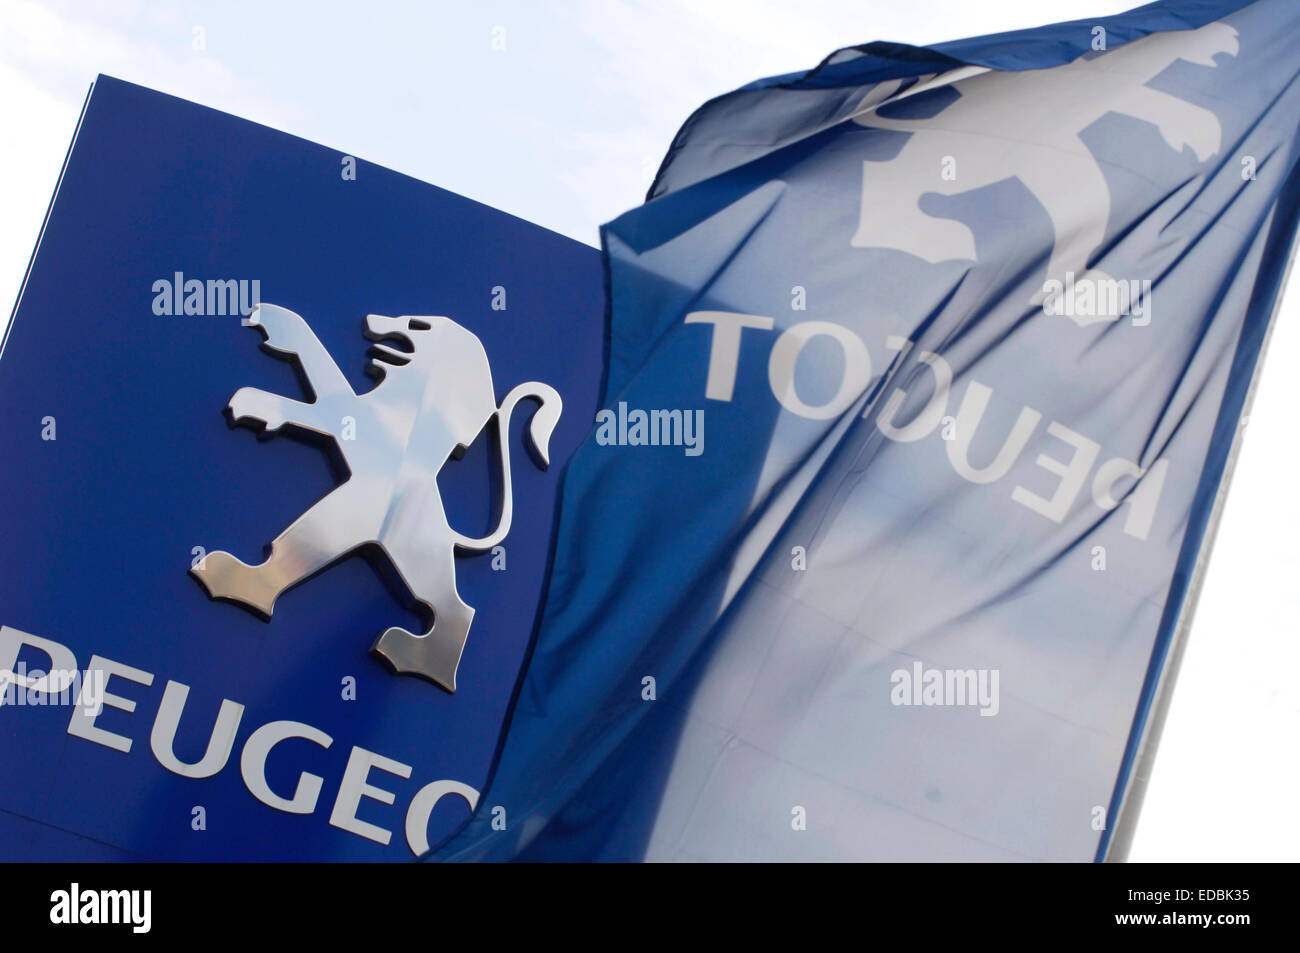 A Peugeot dealership flag and branded signage. Stock Photo